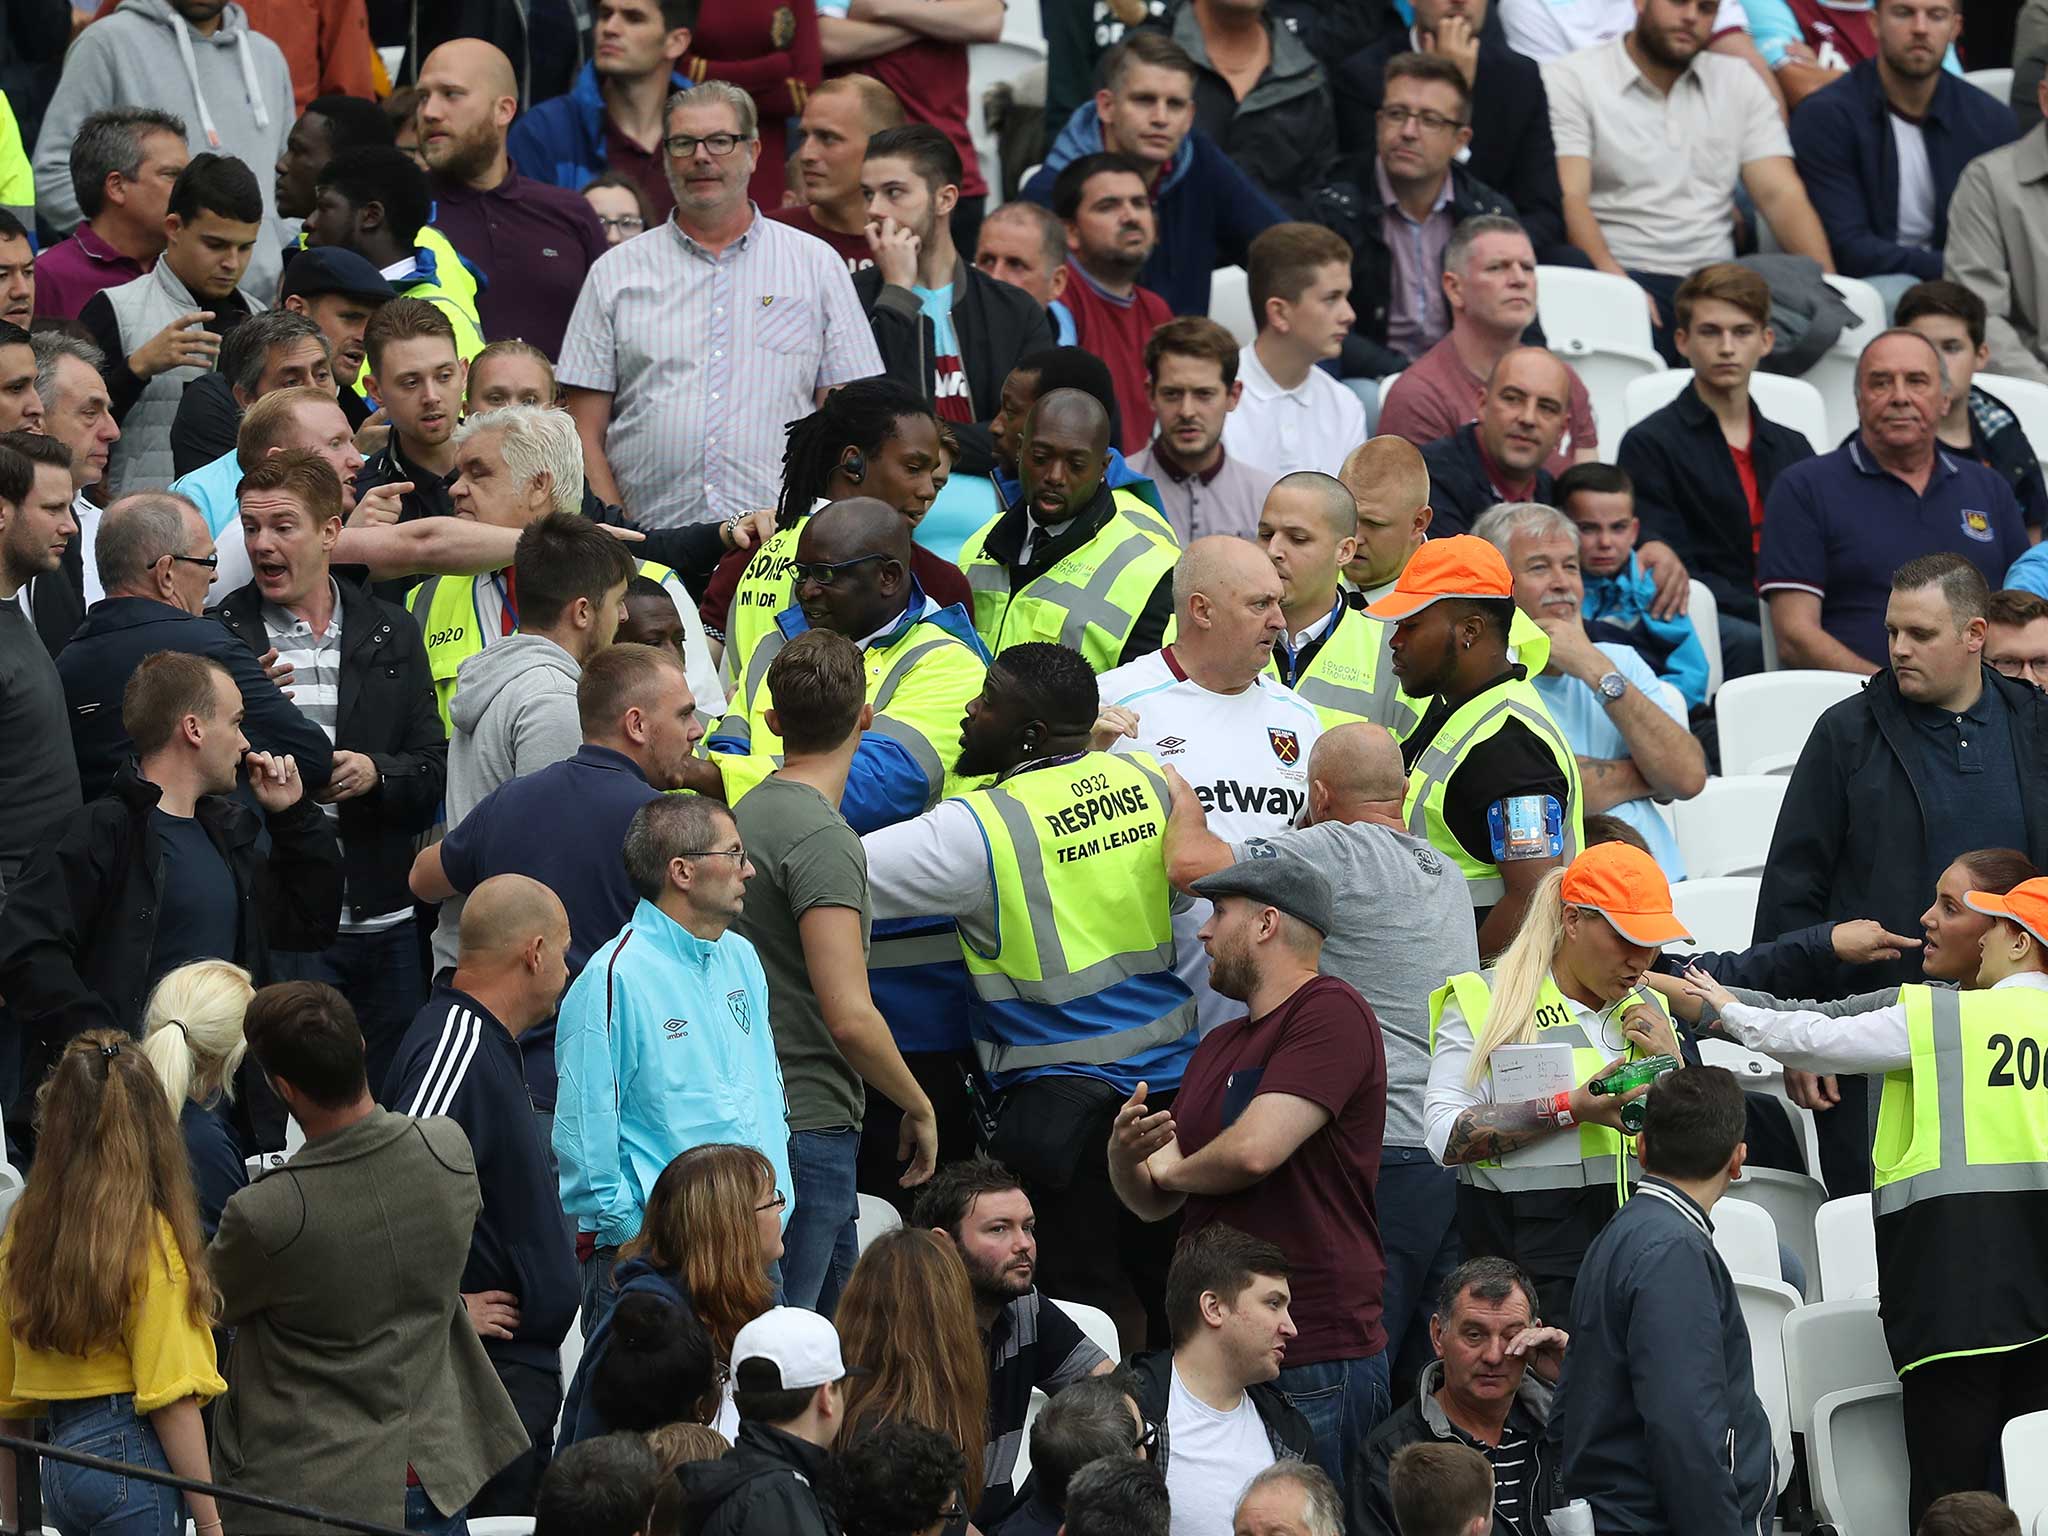 Violence flared up between supporters at the London Stadium